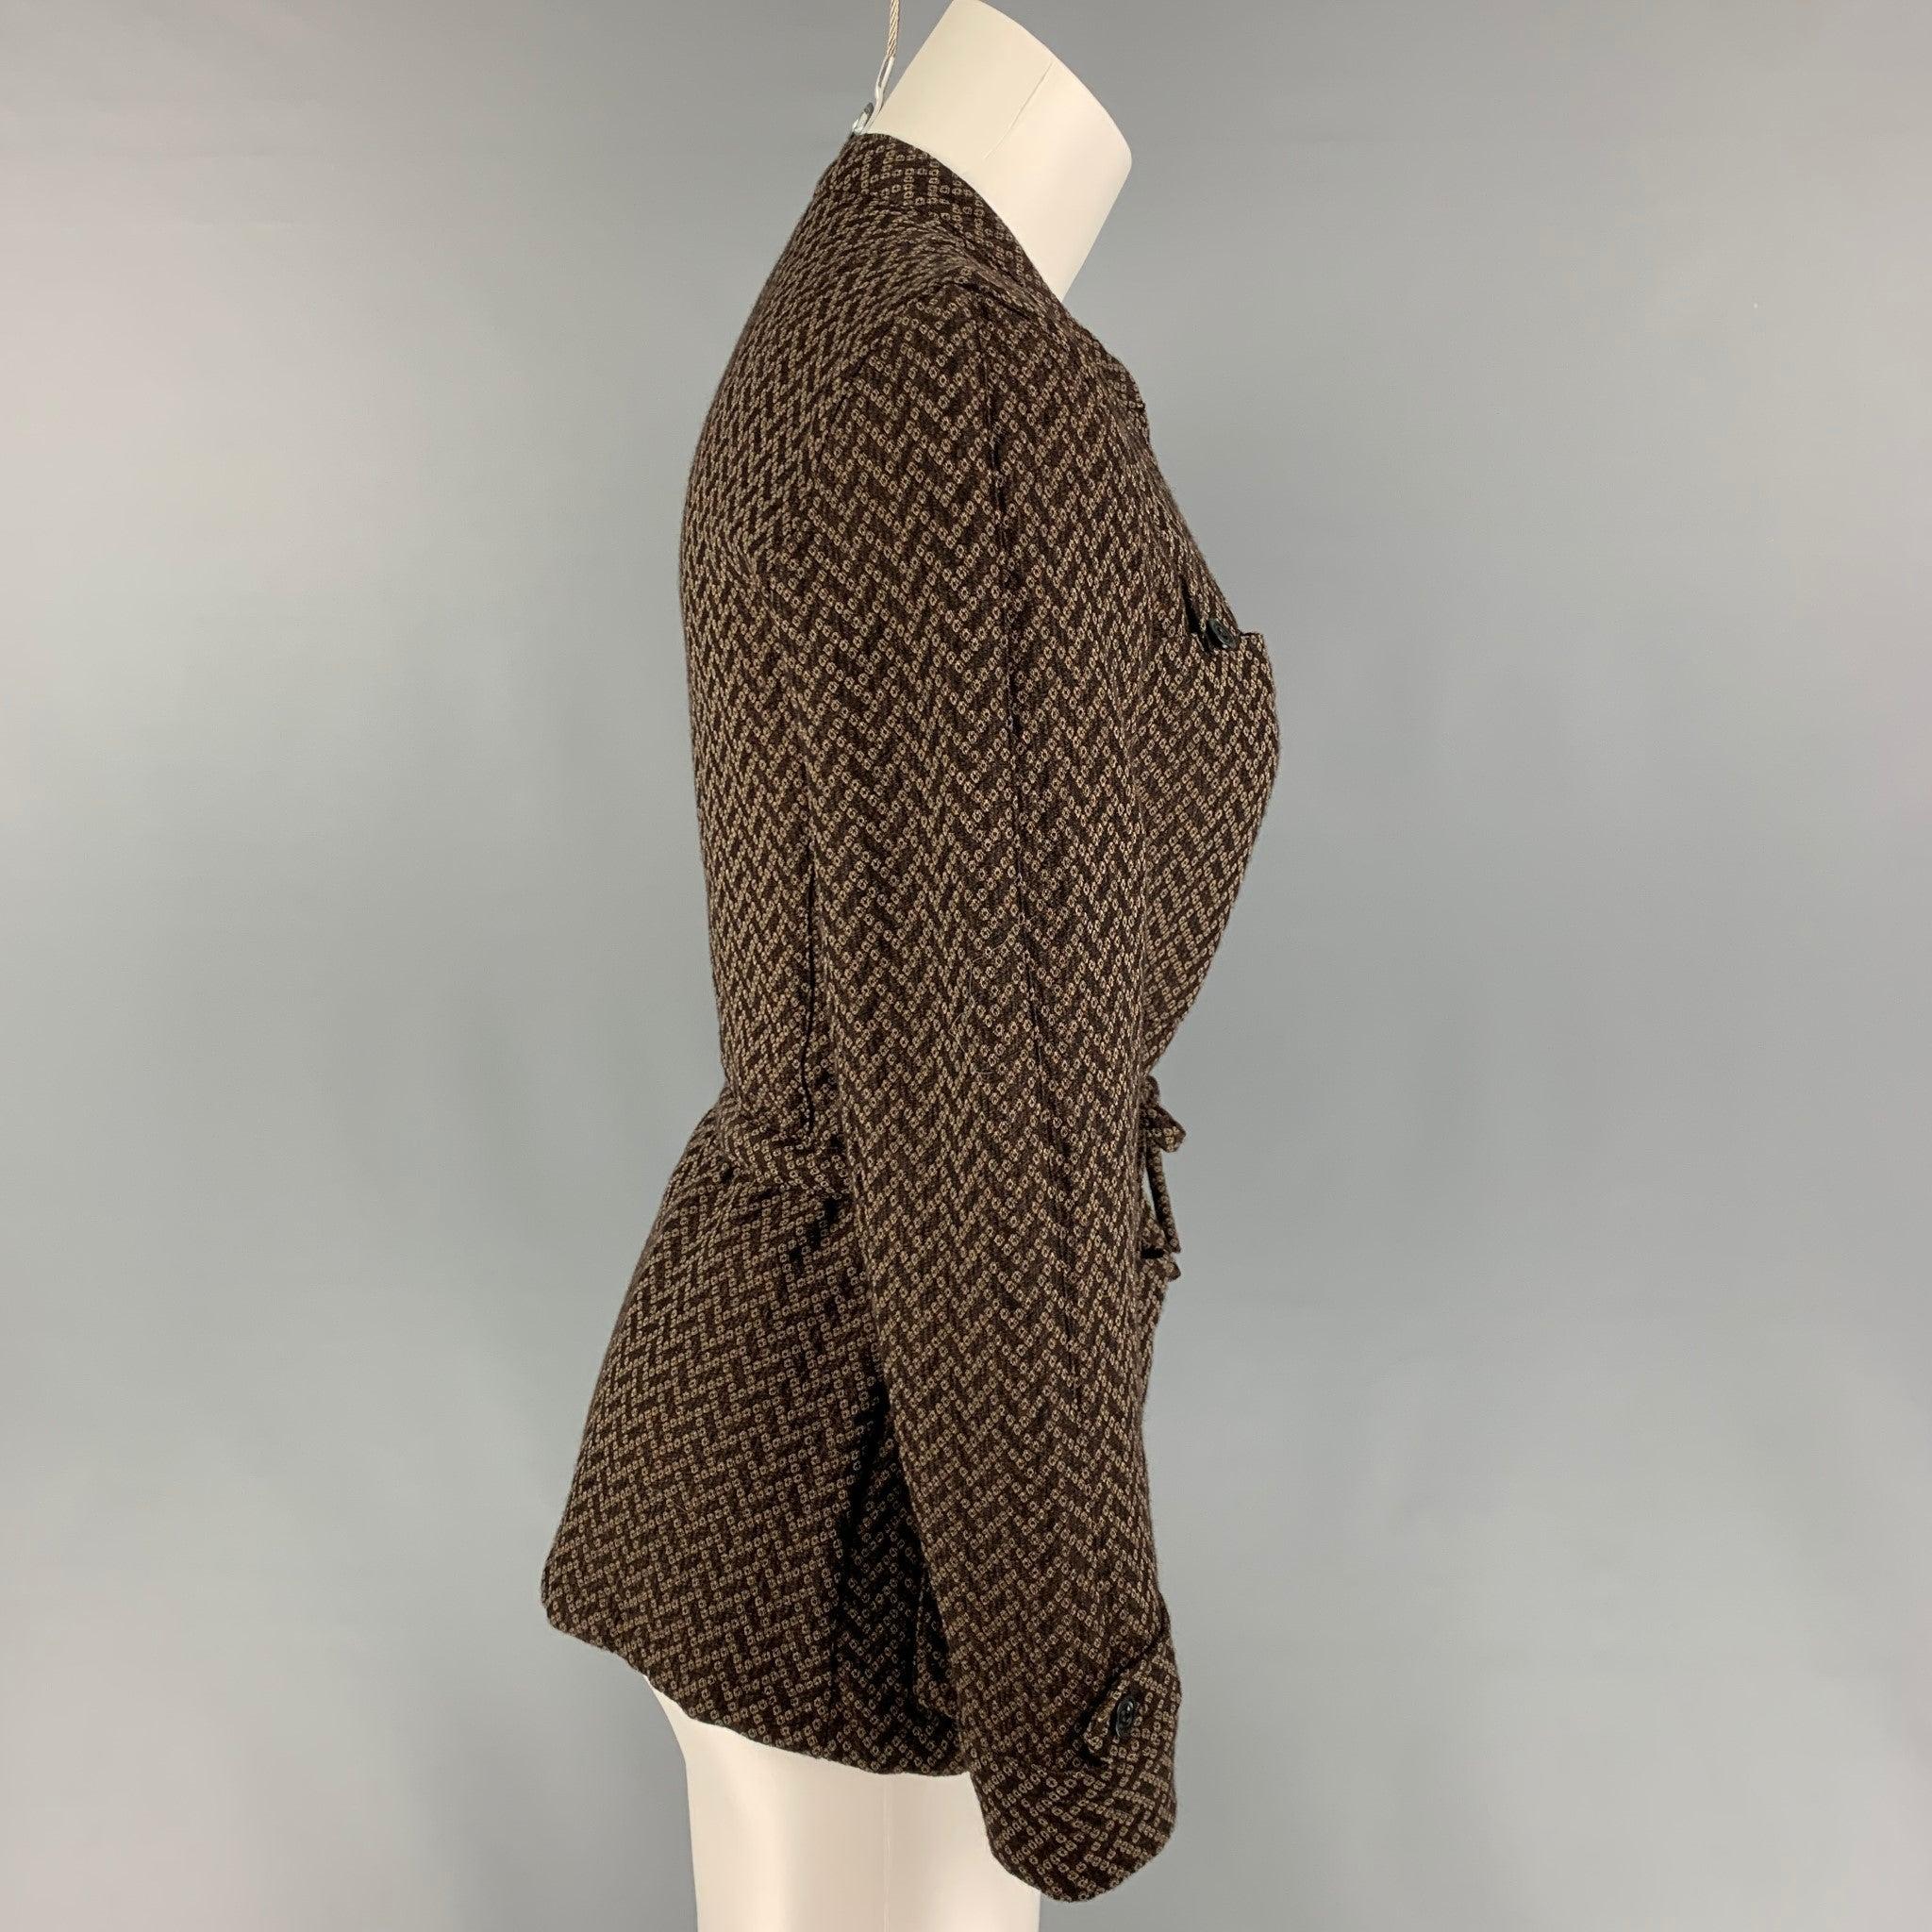 DRIES VAN NOTEN jacket comes in a brown & white textured wool / rayon featuring a nehru collar, drawstring detail, patch pockets, and a hook & loop closure.Very Good
Pre-Owned Condition. 

Marked:   36 

Measurements: 
 
Shoulder: 14.5 inches  Bust: